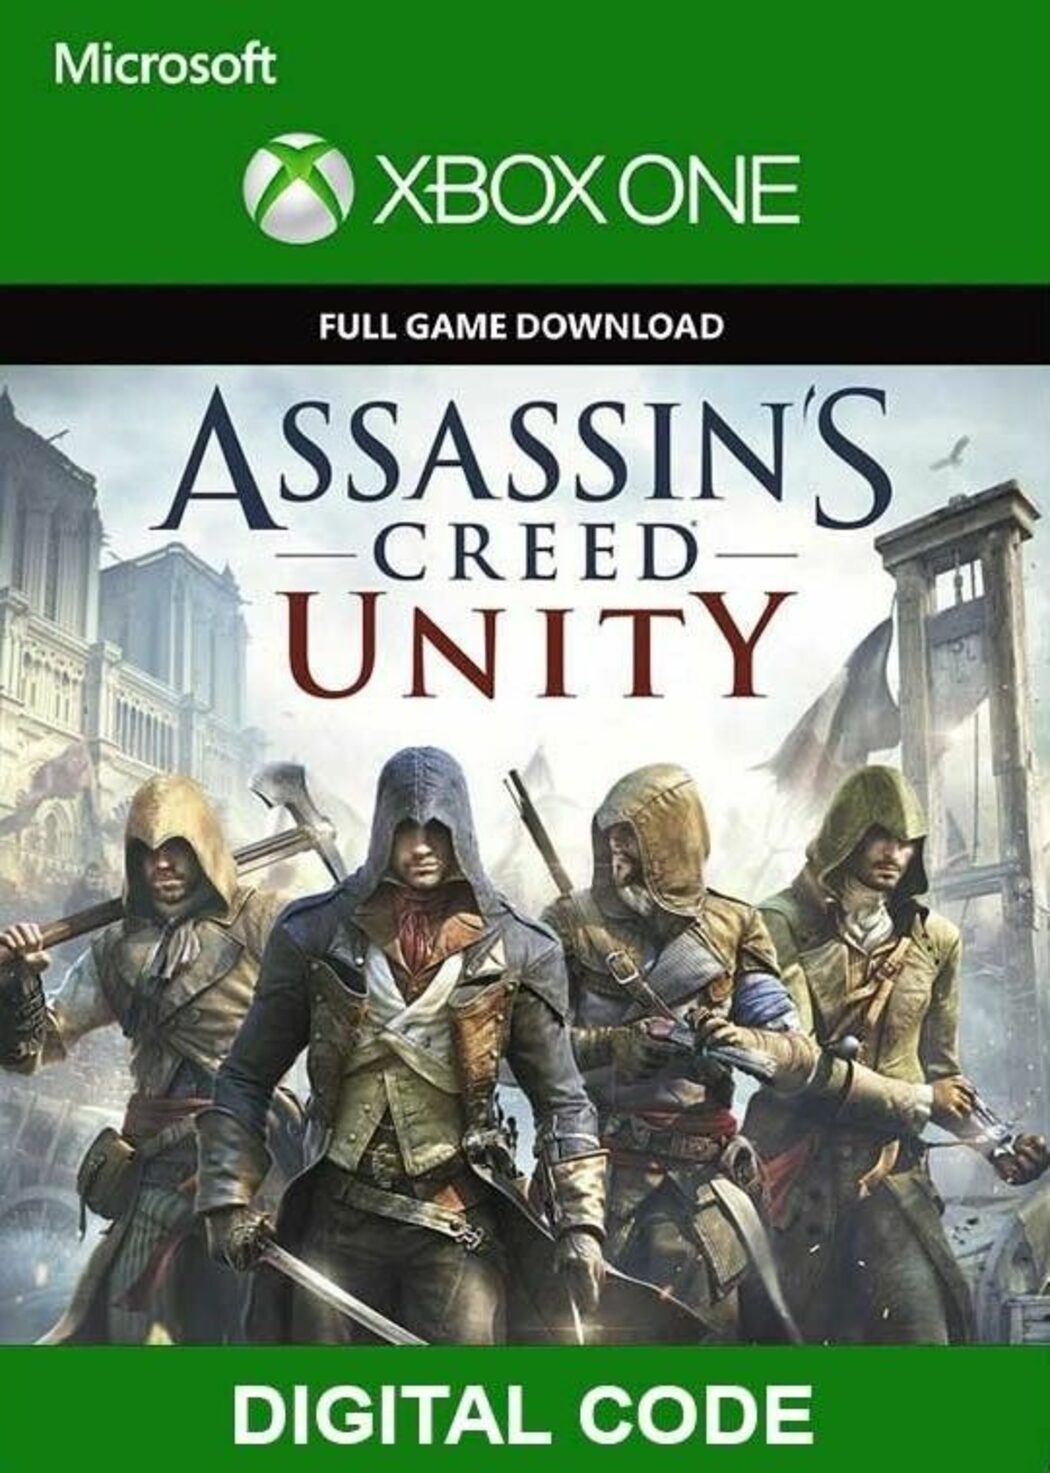 Assassin's Creed Ps3 Bundle + Assassin's Creed Unity Xbox One